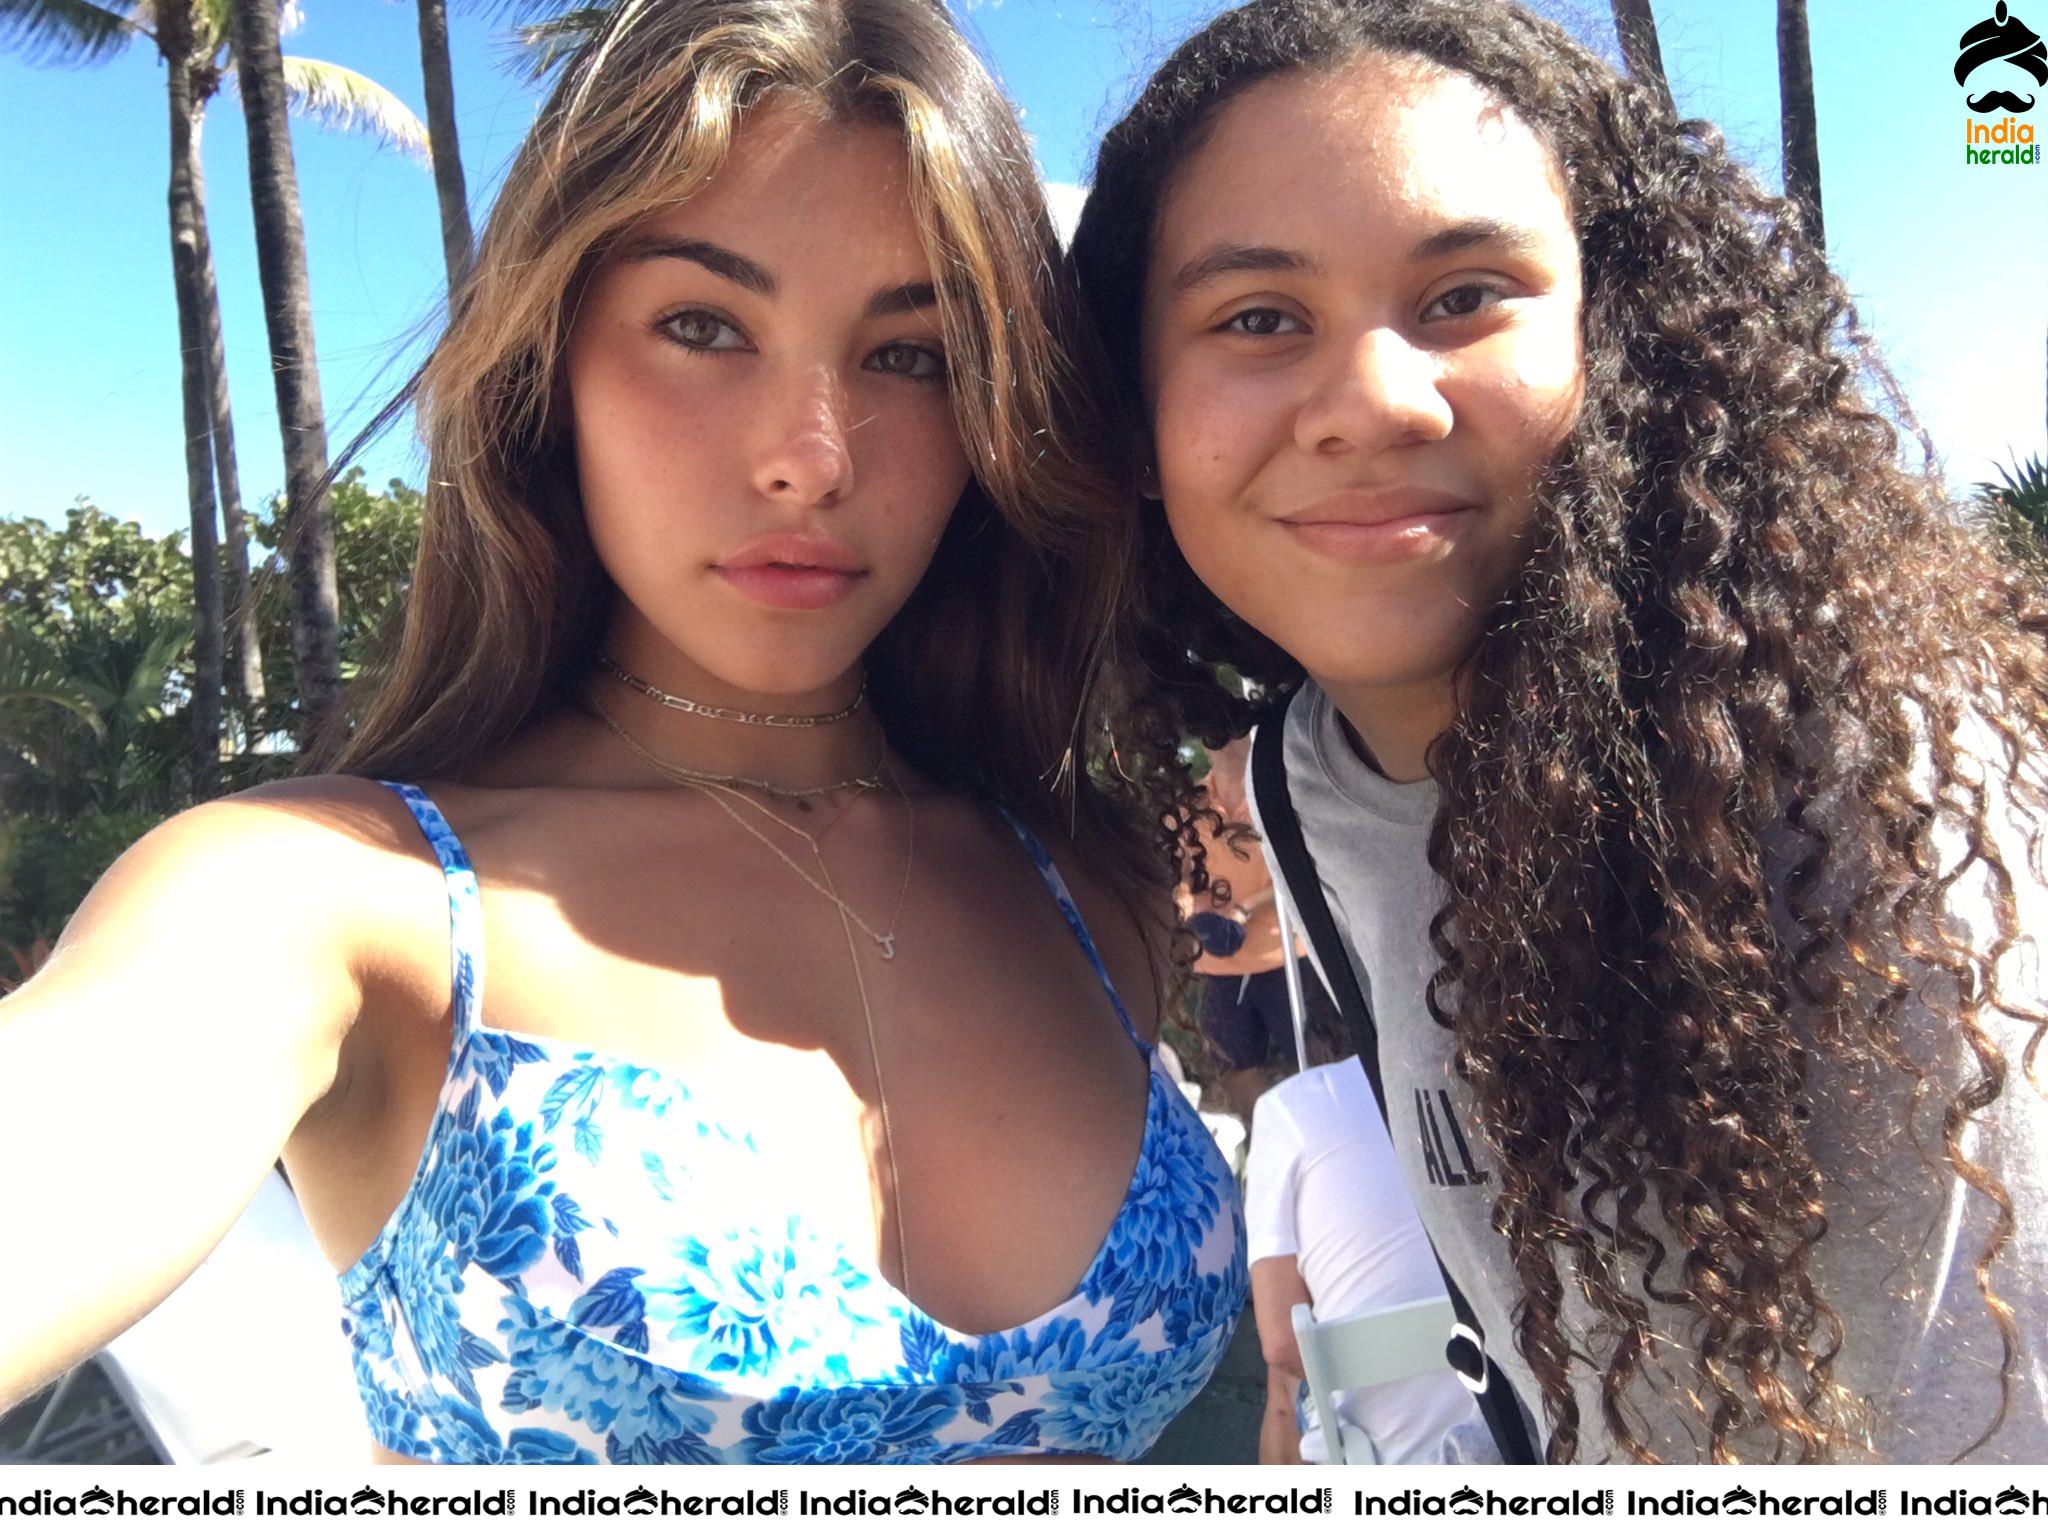 Madison Beer Clicked in Bikini by fans in Miami Set 2